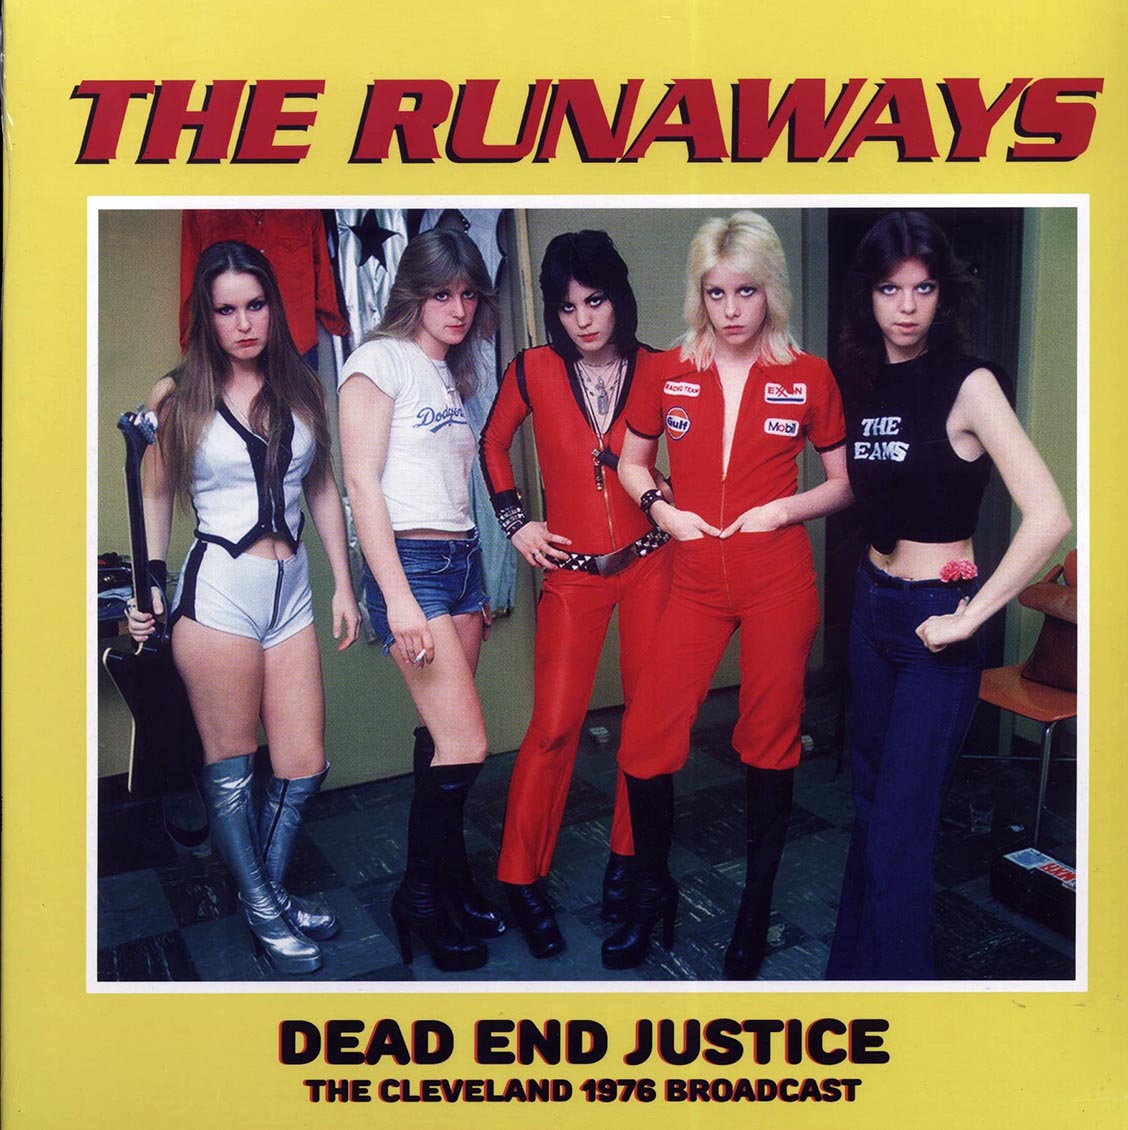 The Runaways - Dead End Justice: The Cleveland 1976 Broadcast (ltd. 500 copies made) - Vinyl LP